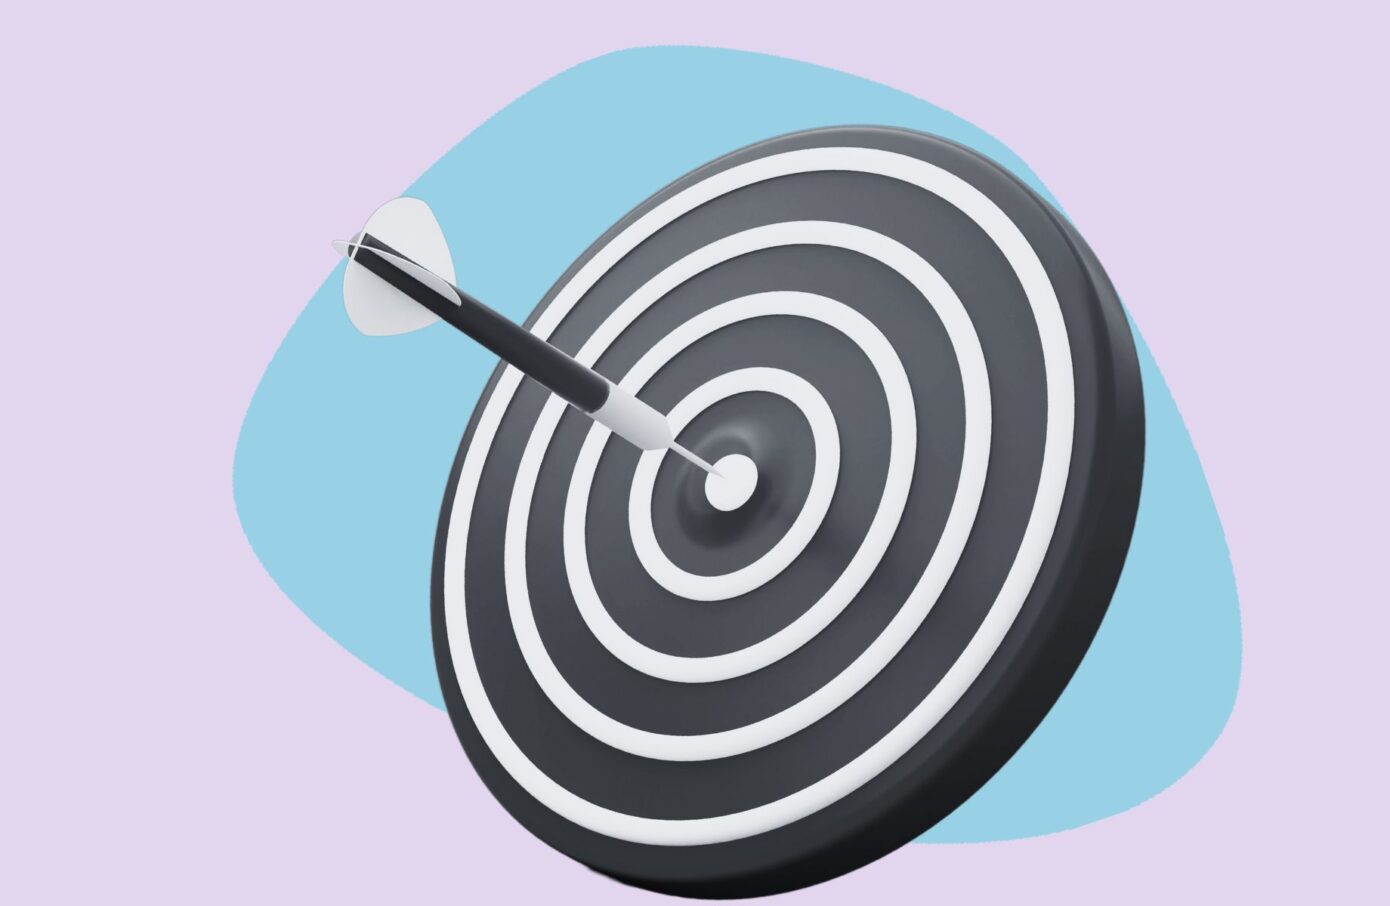 image of a target with darts in the bullseye